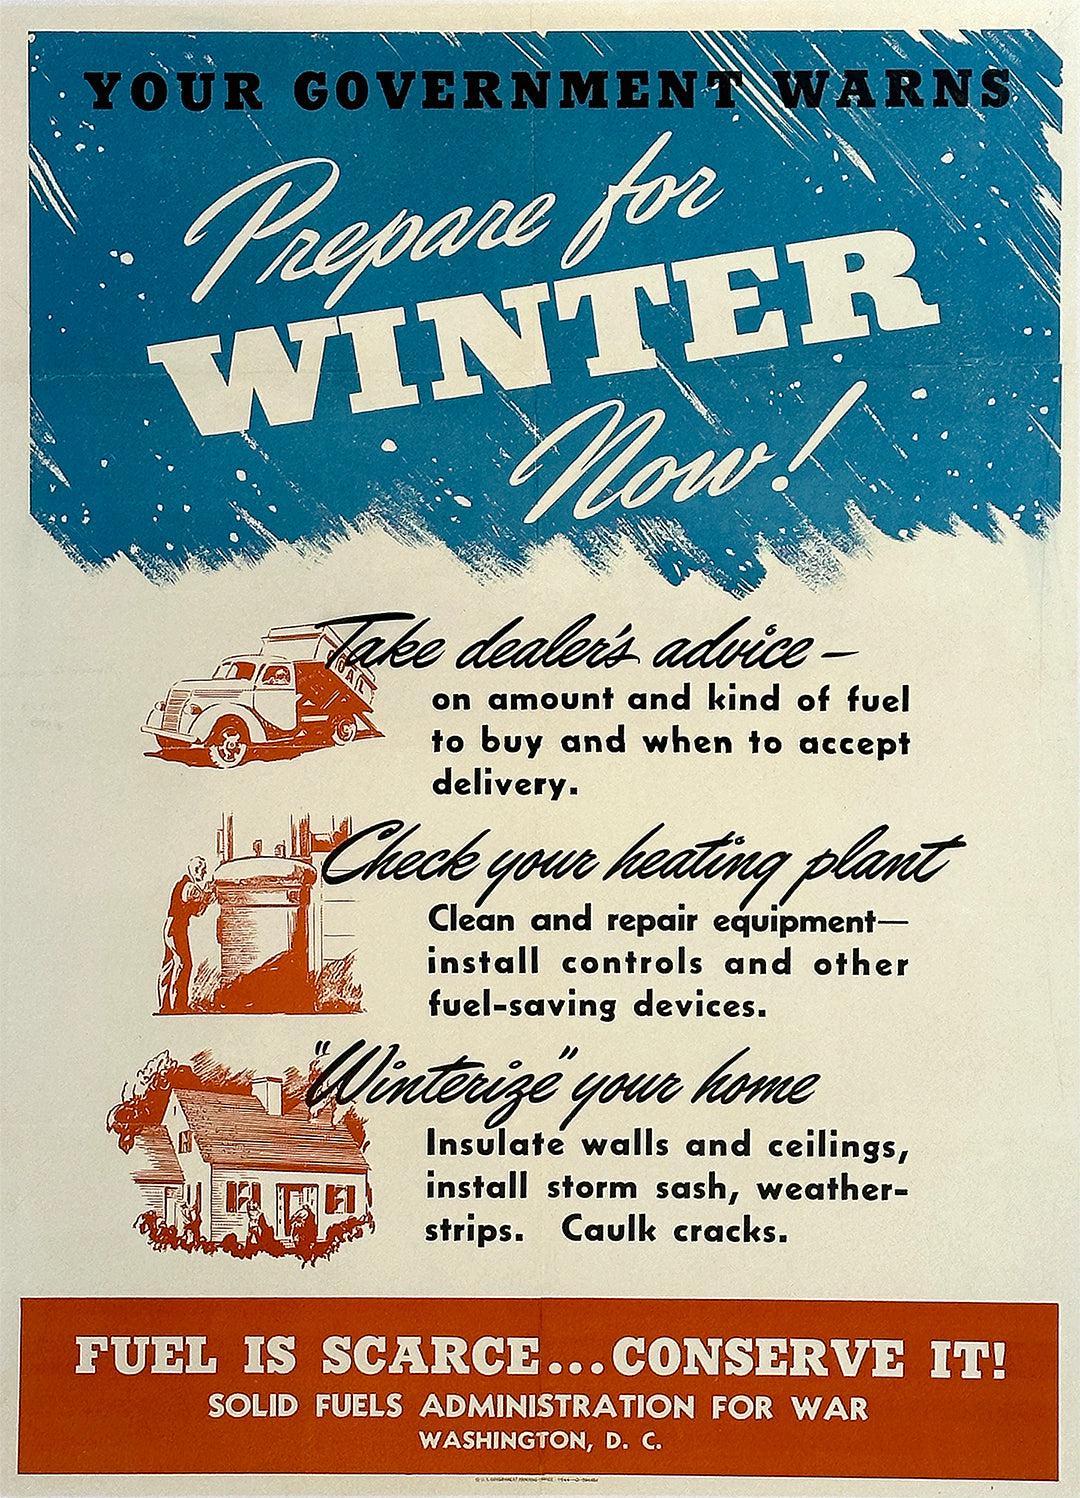 Original Vintage WWII Prepare for Winter Now Poster 1944